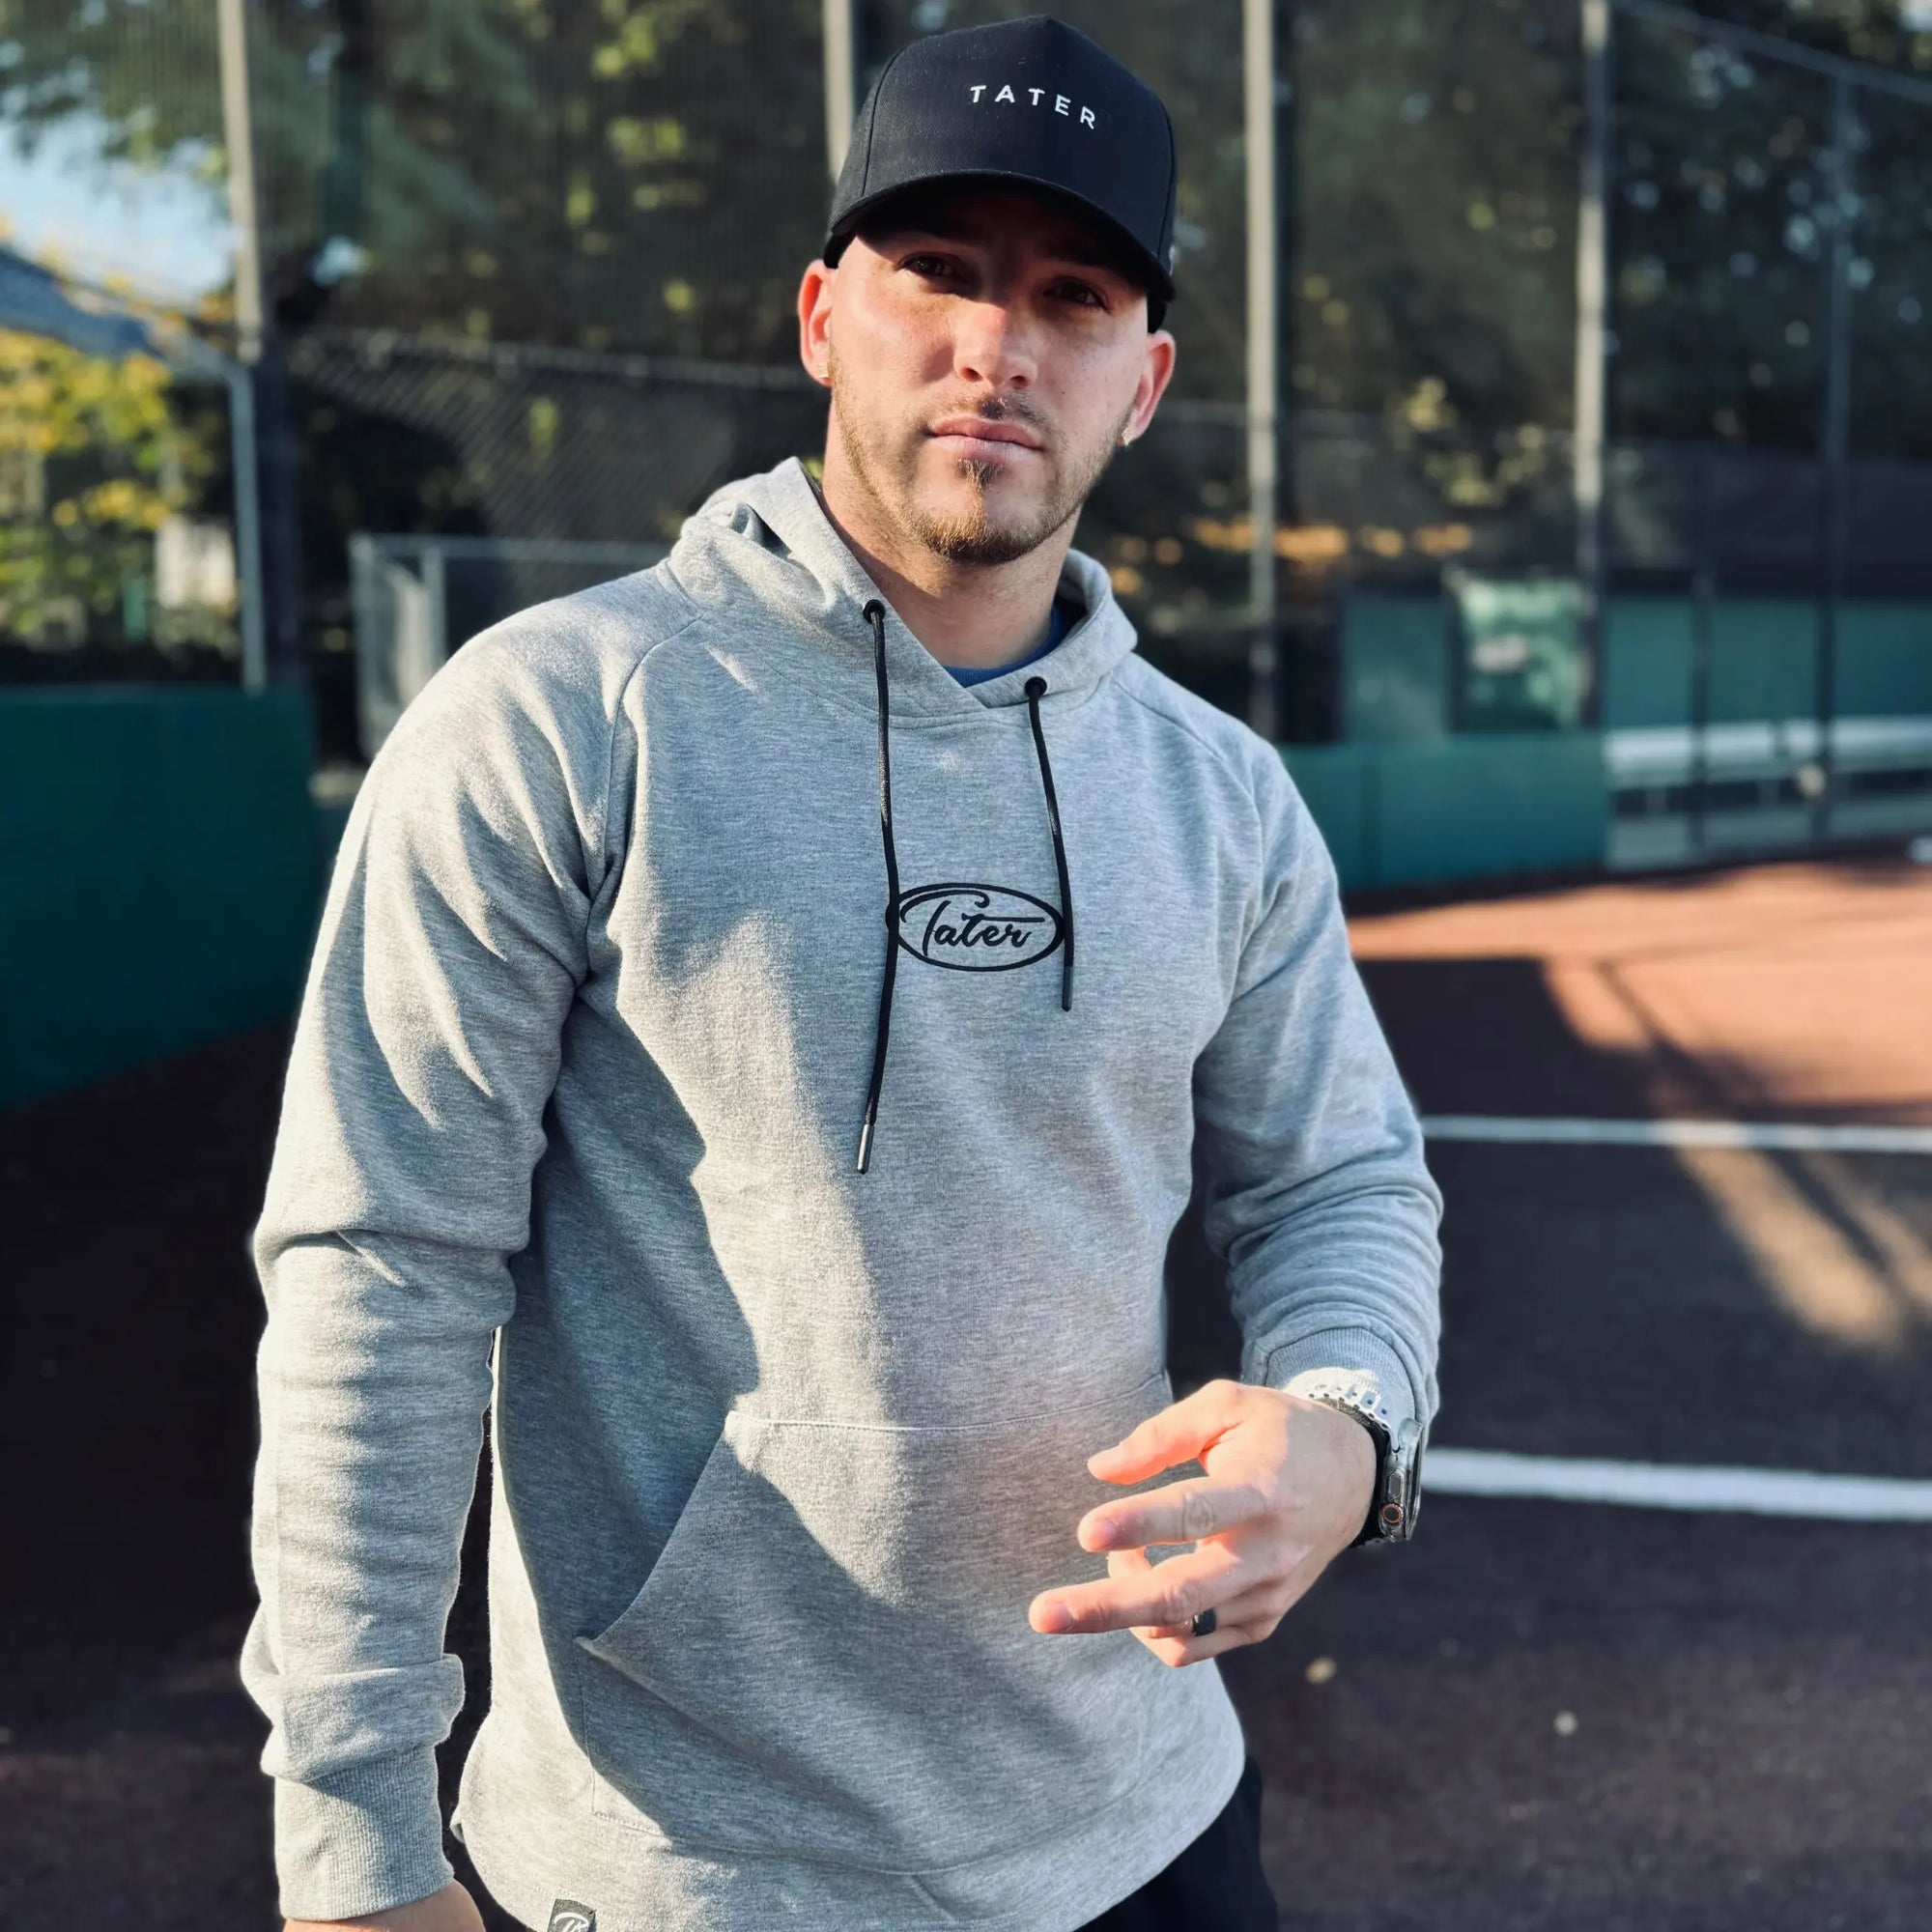 Stylish grey long-sleeve baseball lifestyle hoodie by Tater, featuring a minimalist black logo on the chest, a spacious front pocket, and black drawstrings, perfect for athletic leisure or casual wear.